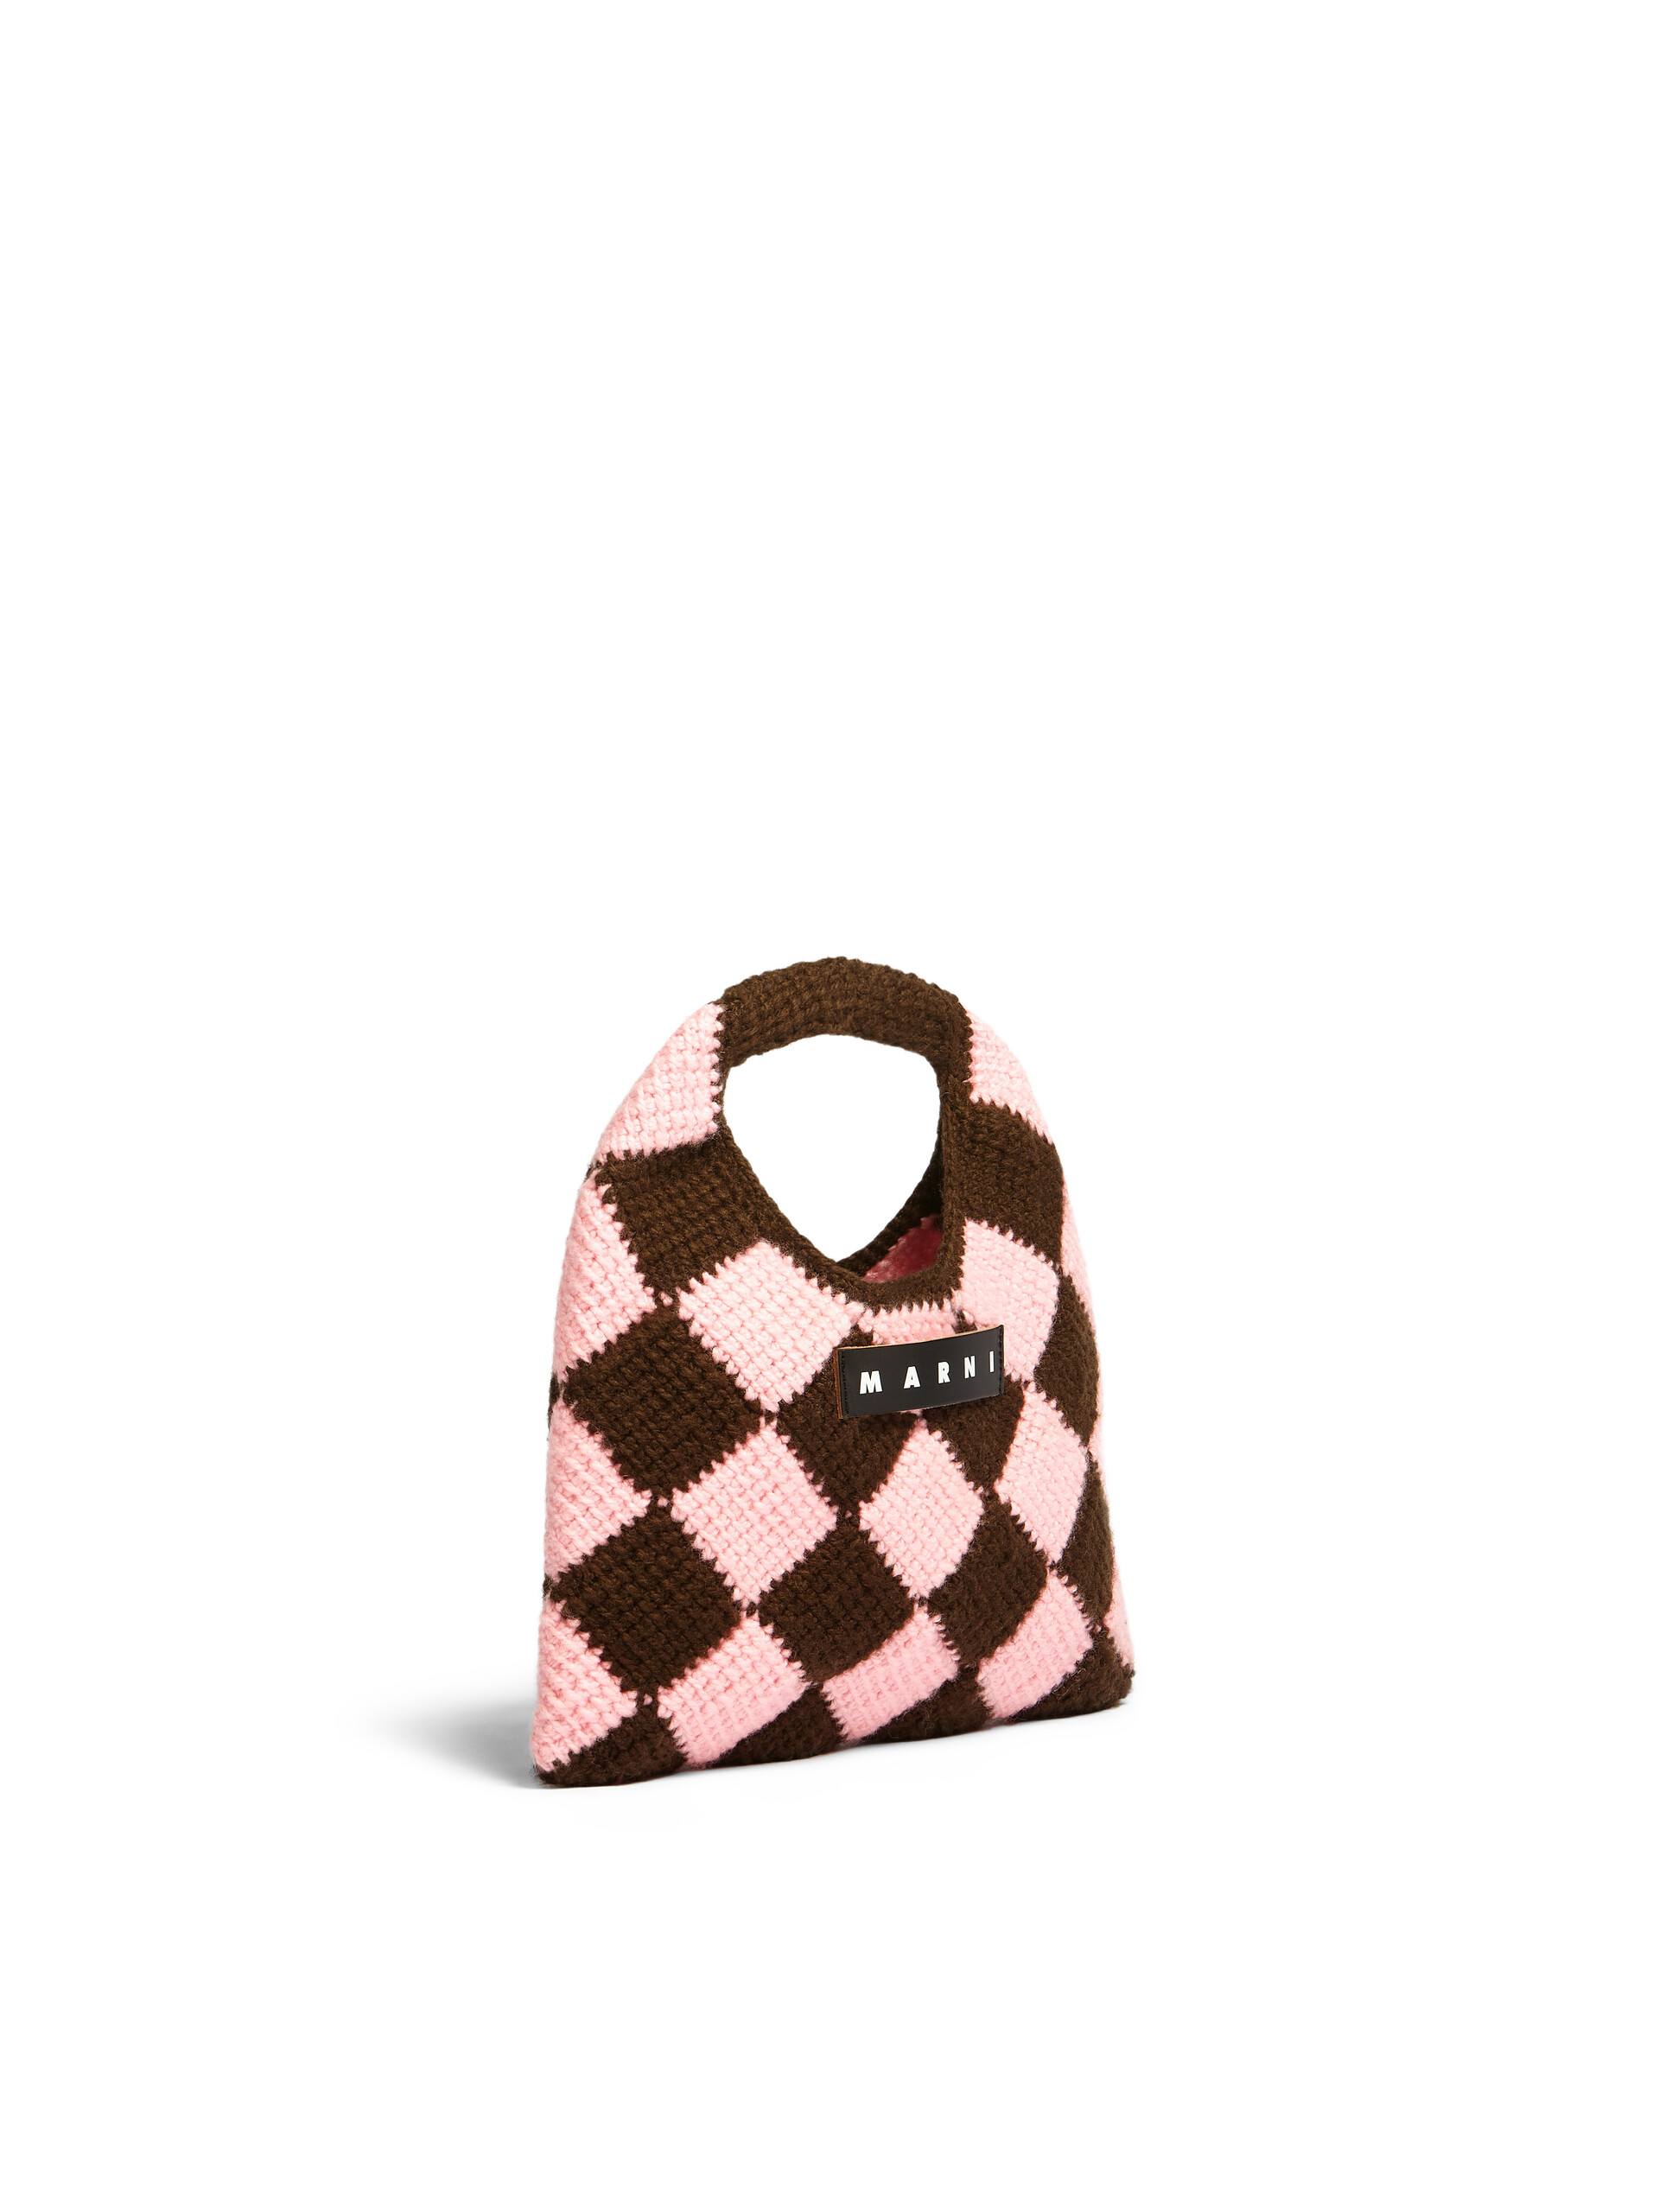 MARNI MARKET DIAMOND small bag in brown and pink tech wool - Shopping Bags - Image 2